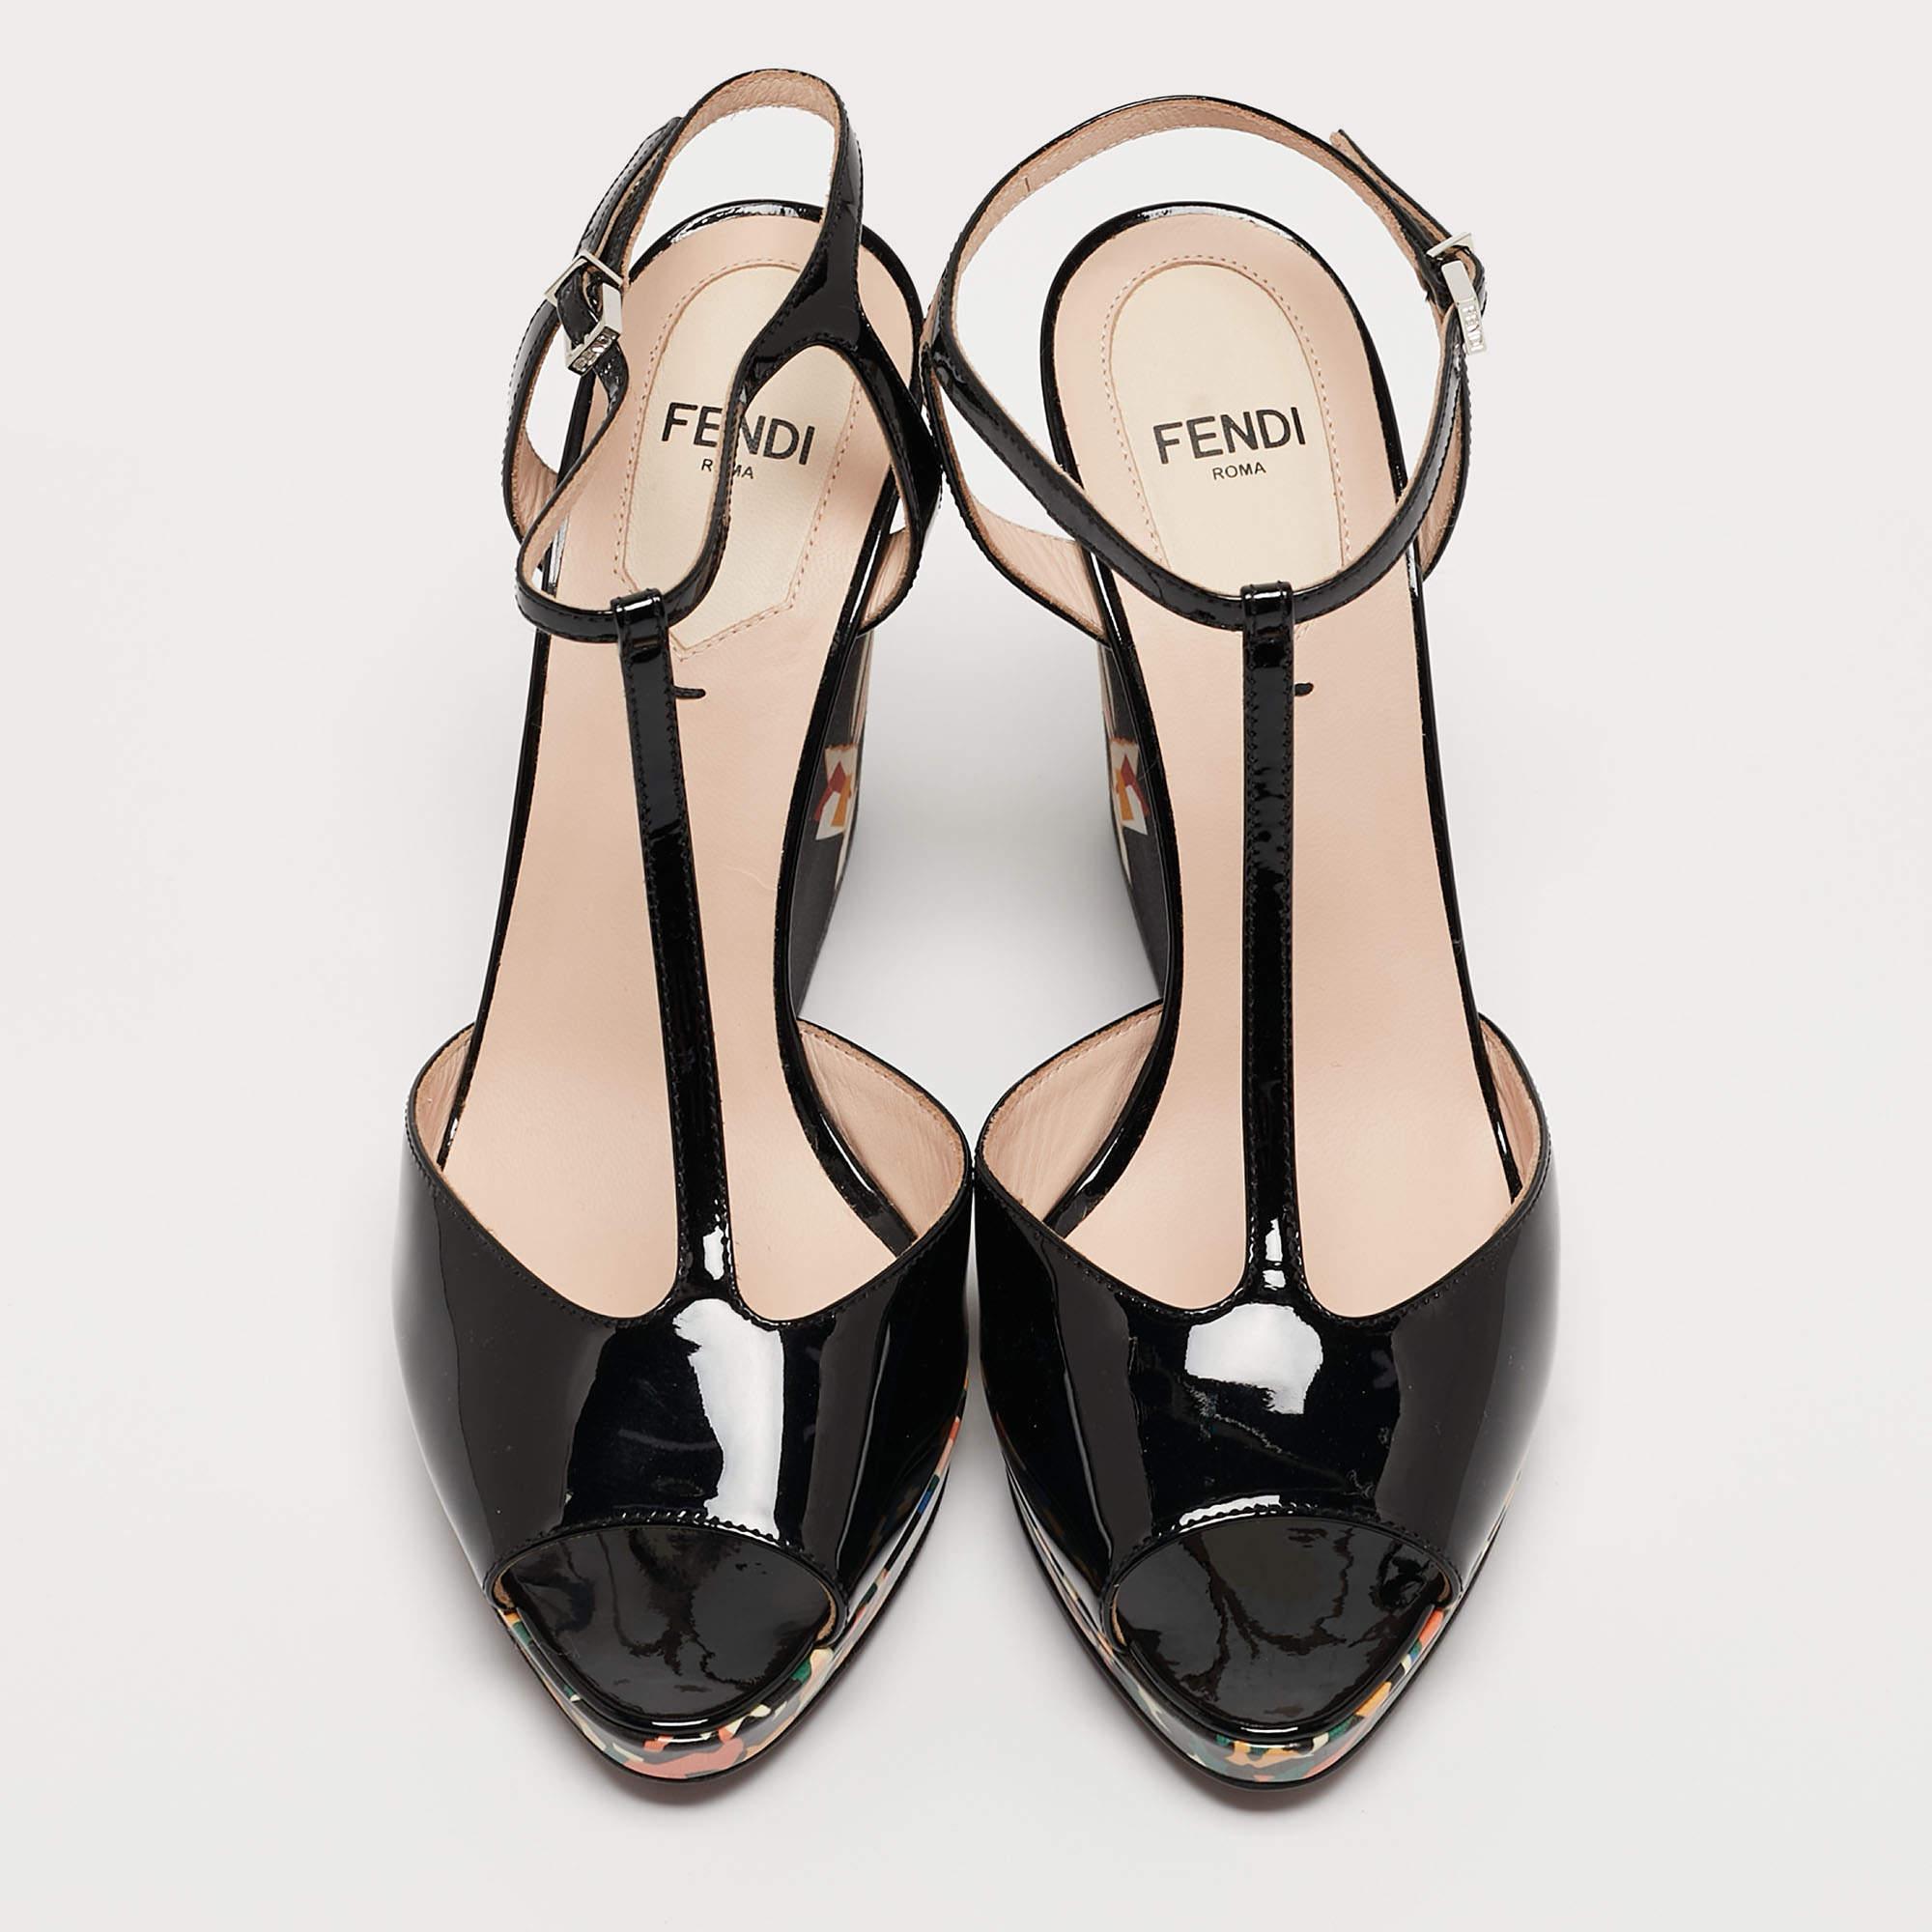 You won't be able to resist this pair of flawless Fendi sandals. Made from patent leather, the sandals feature peep toes, a T-strap, and adjustable ankle strap fastening. Their wedge heels feature Bird of Paradise motifs.

Includes: Original